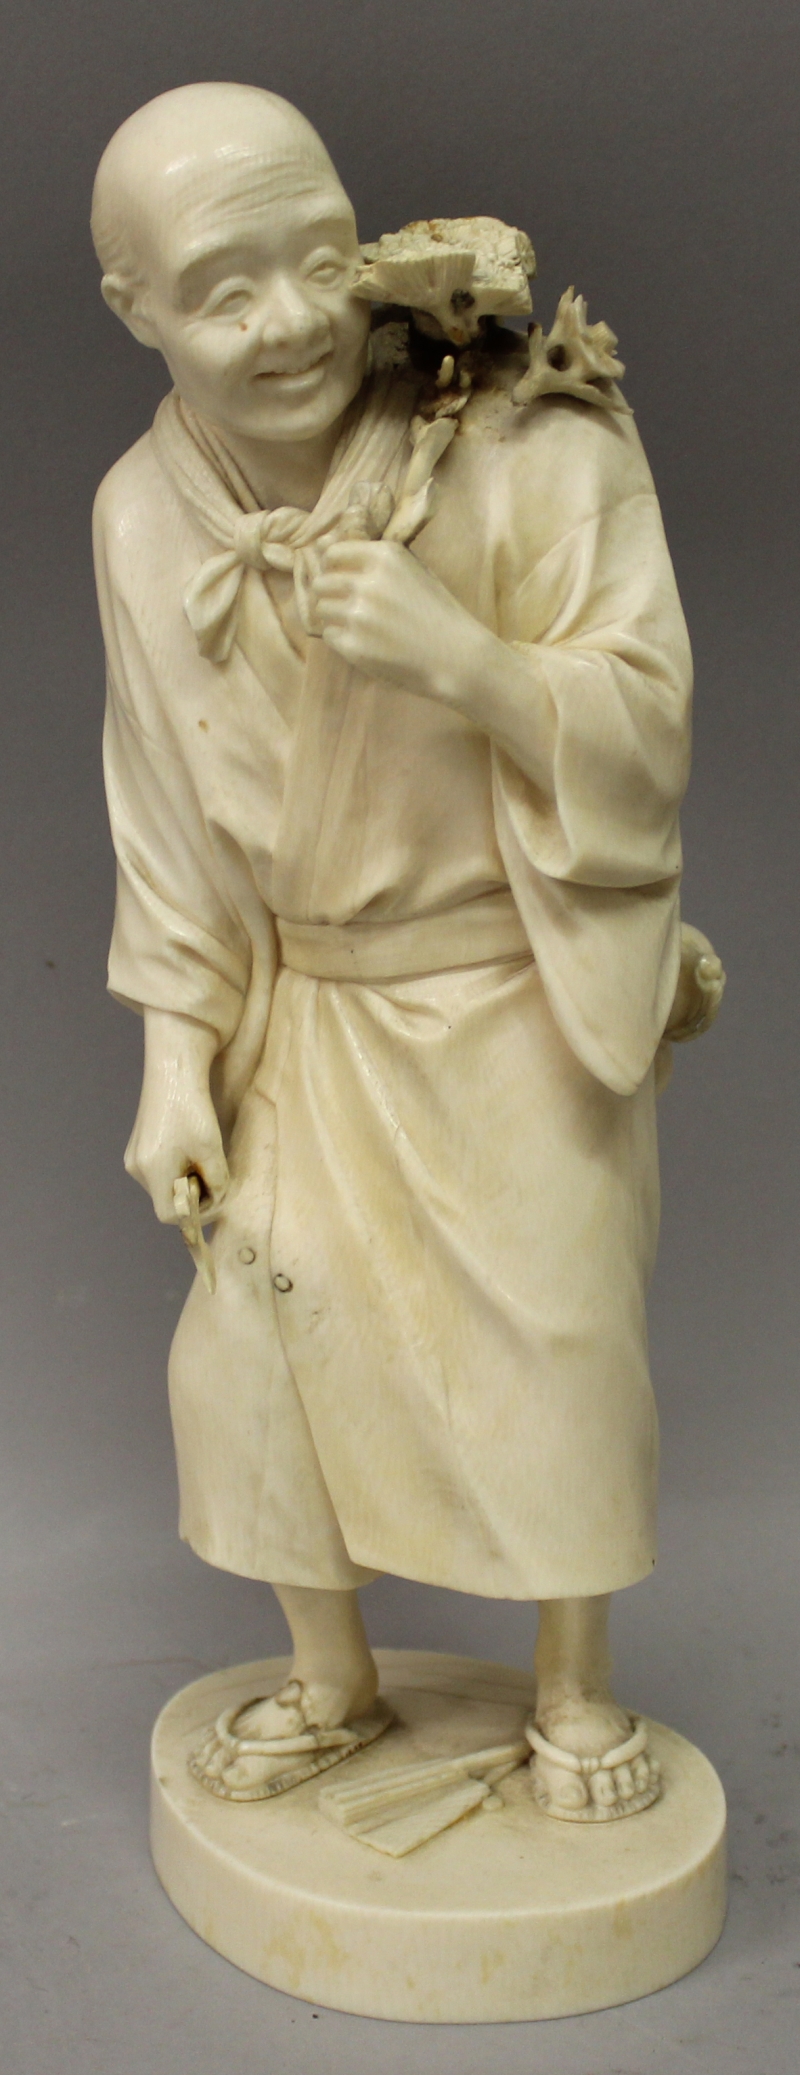 A LARGE GOOD QUALITY JAPANESE MEIJI PERIOD TOKYO SCHOOL IVORY OKIMONO OF A STANDING MAN, holding